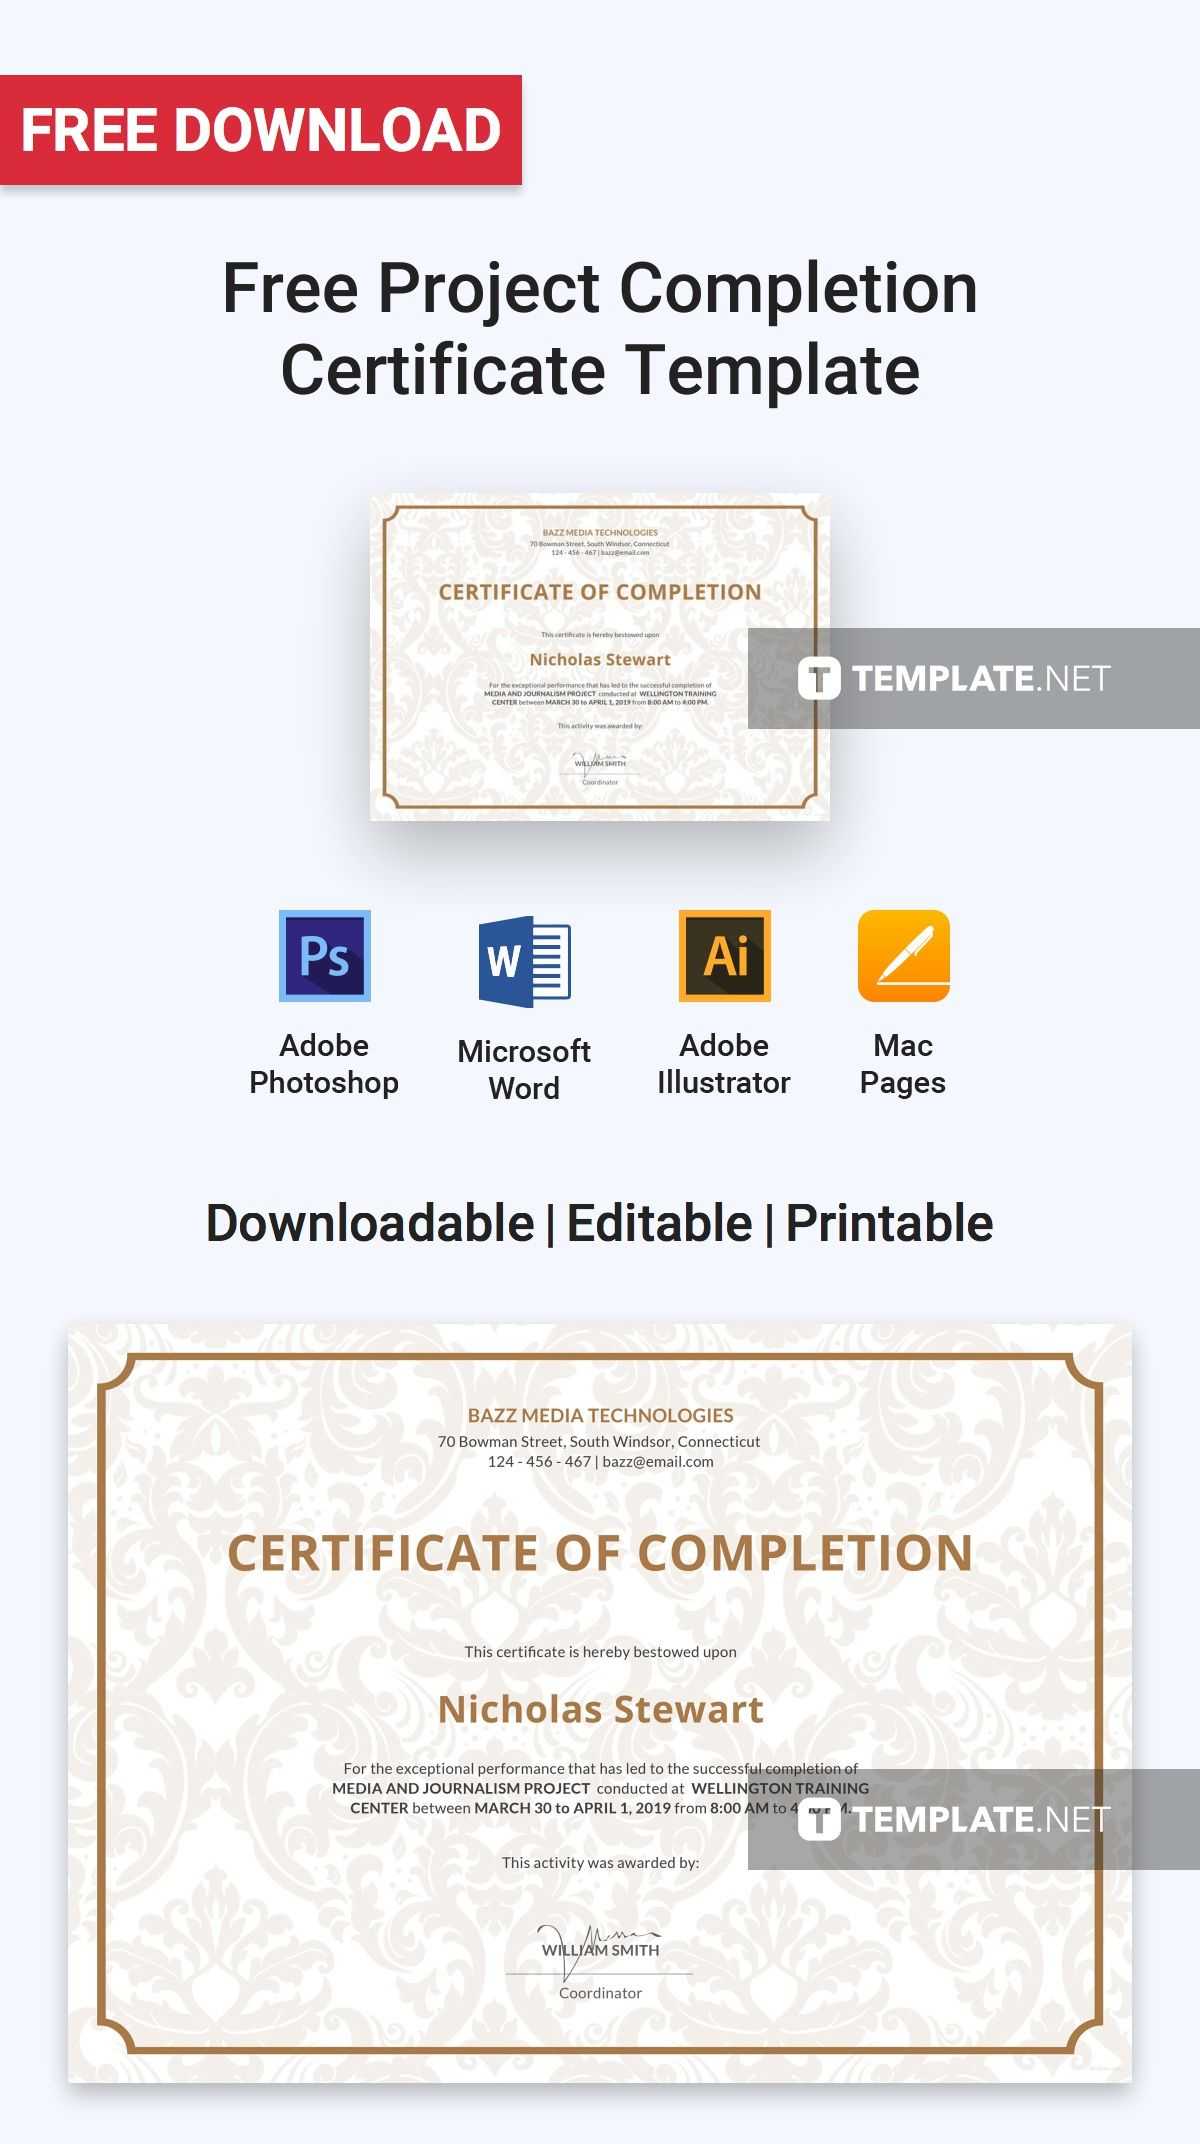 Free Project Completion Certificate | Certificate Templates With Regard To Certificate Template For Project Completion